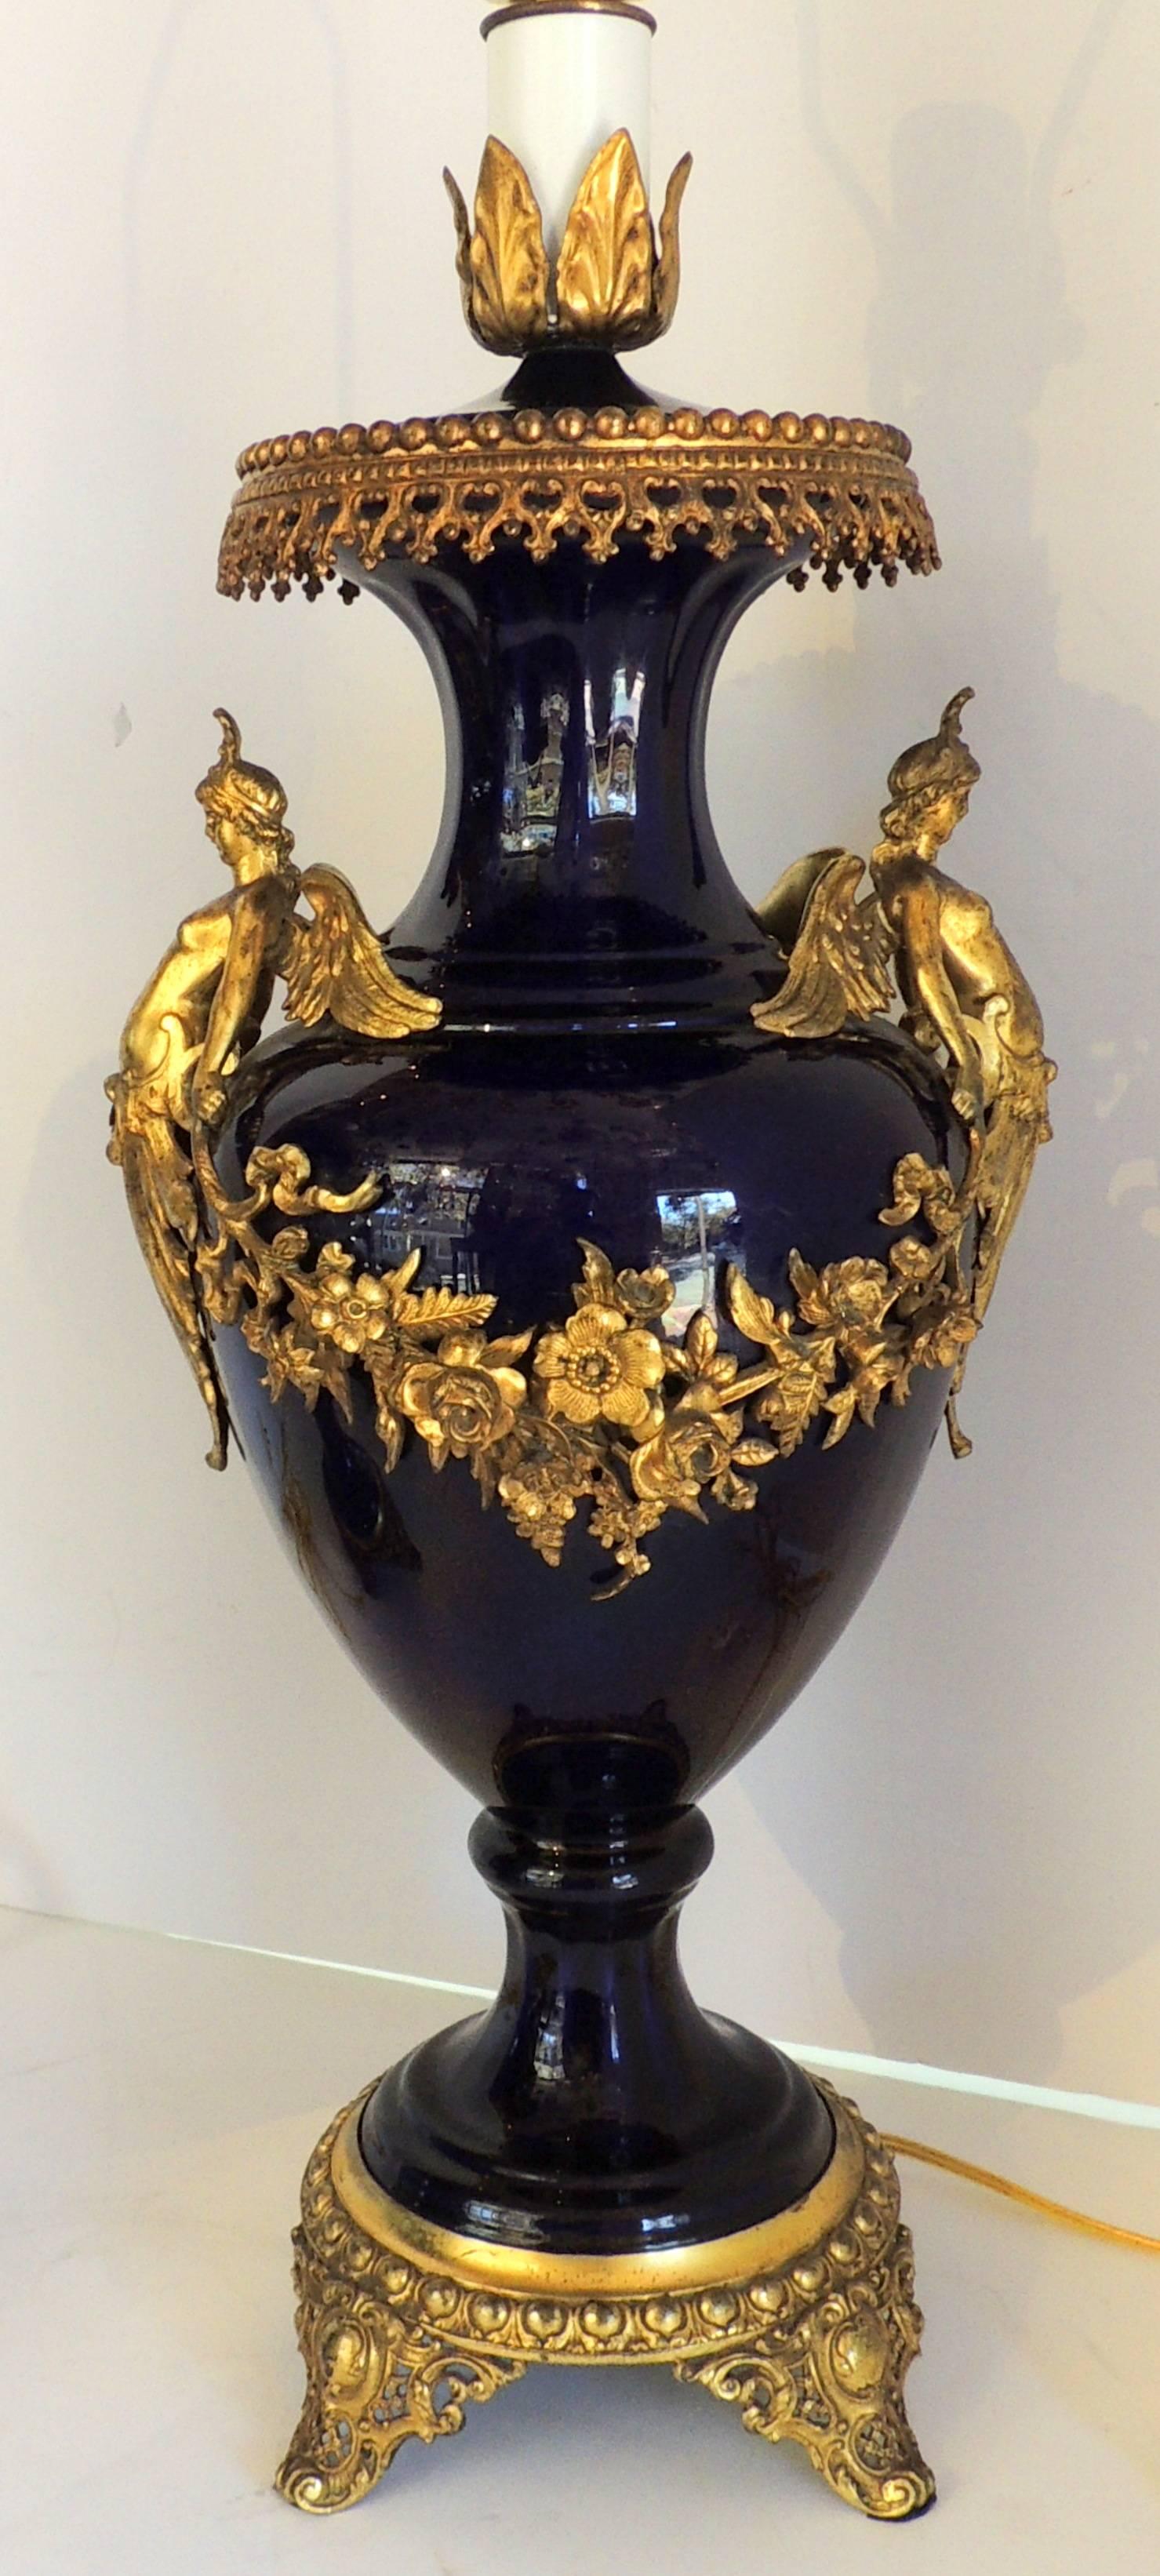 A wonderful pair of French doré bronze ormolu-mounted women figure and bouquet drapings of flowers Sevres cobalt blue porcelain urn form lamps.